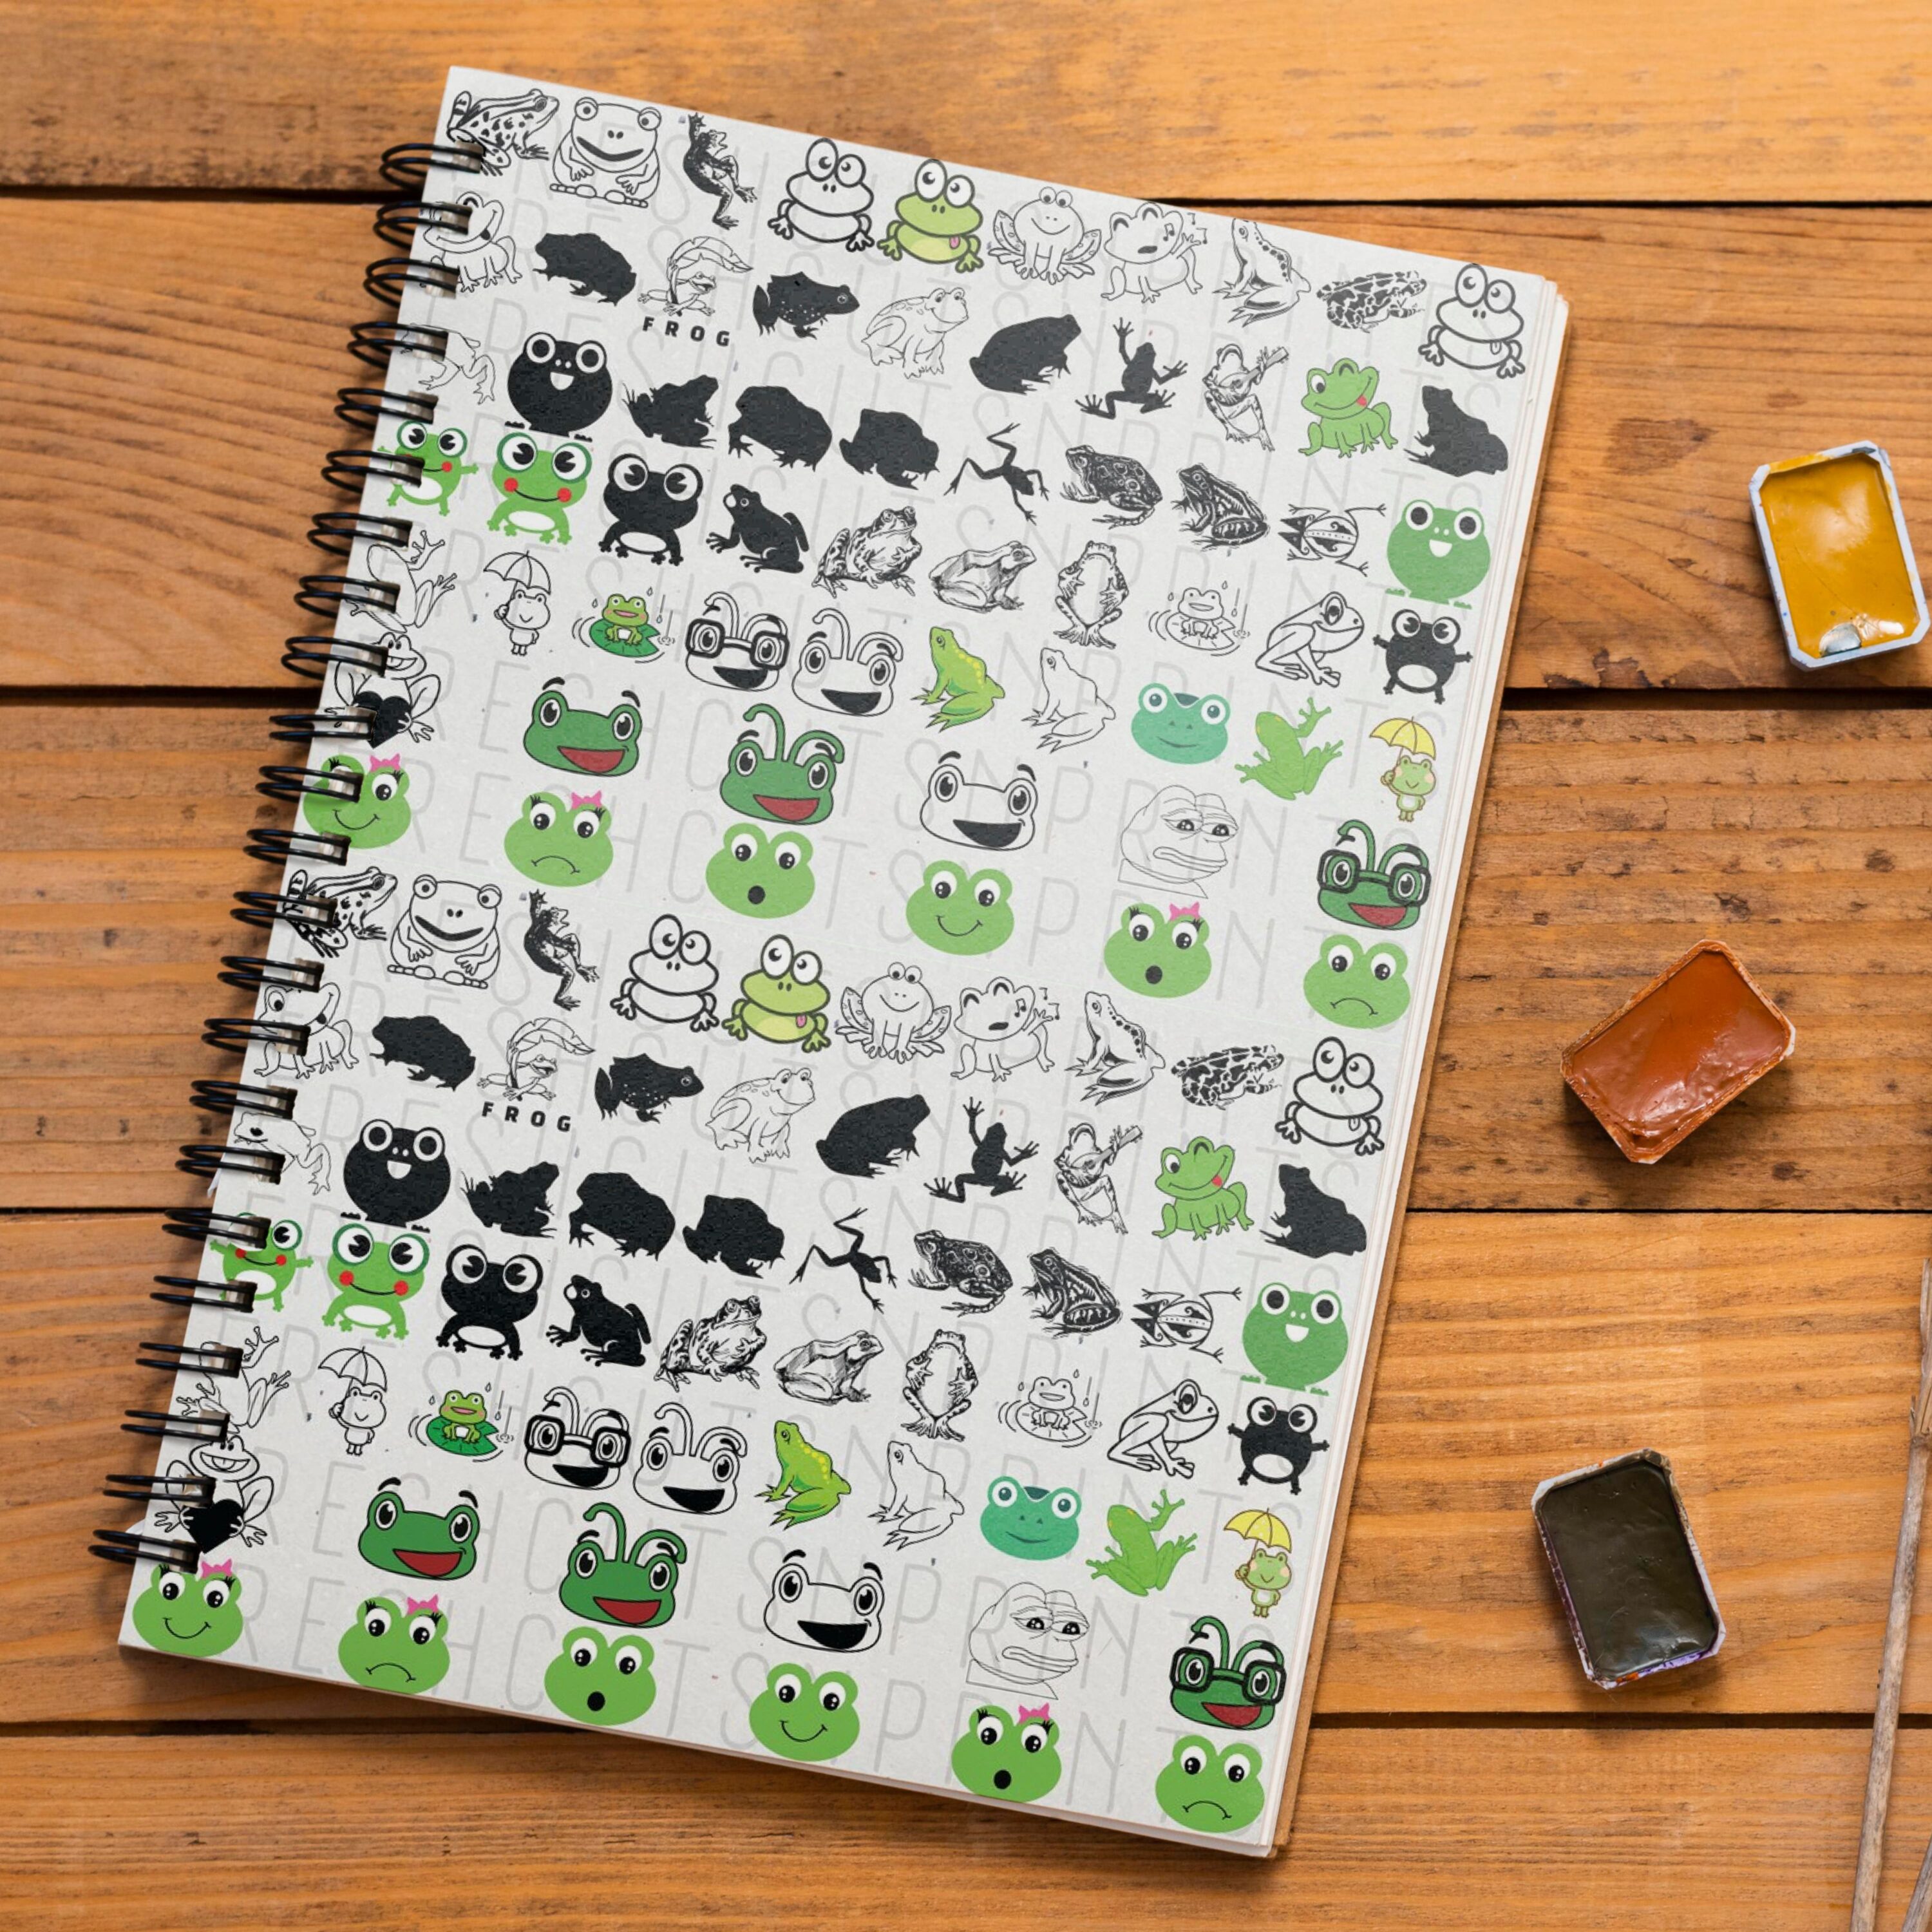 Notebook with a variety of stickers on it.